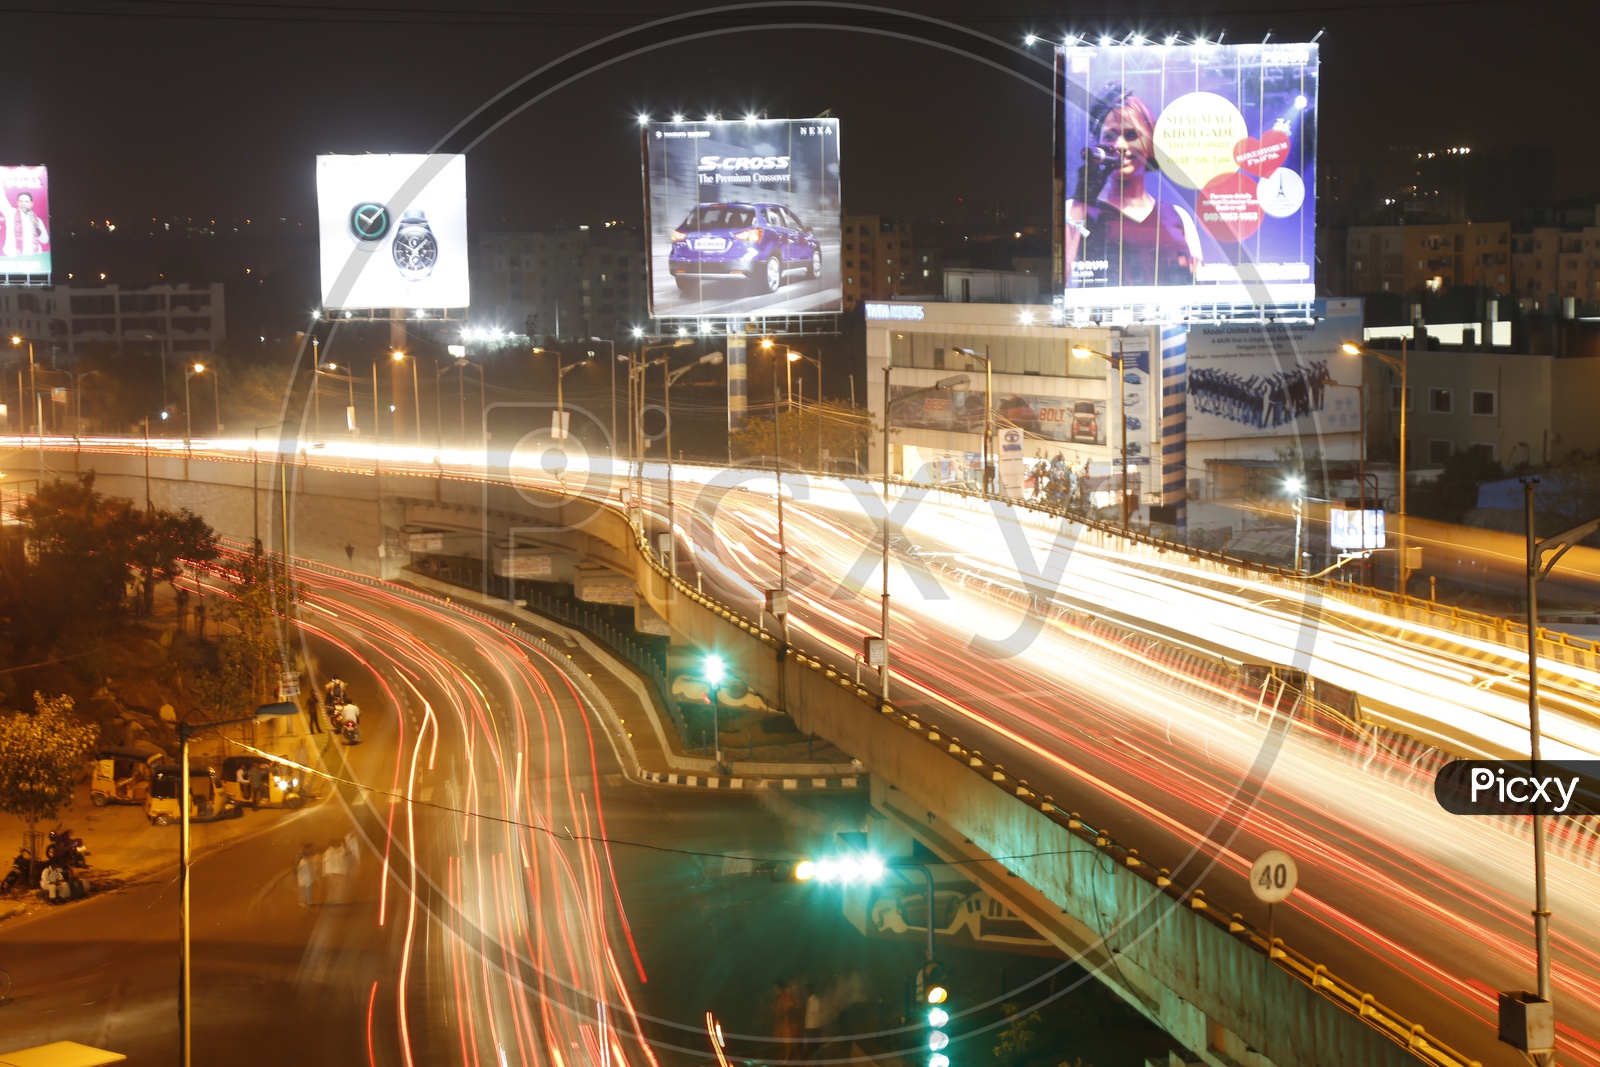 Long Exposure Shot Of Fast Moving Vehicles On Hi-Tech City Flyover With Light trails